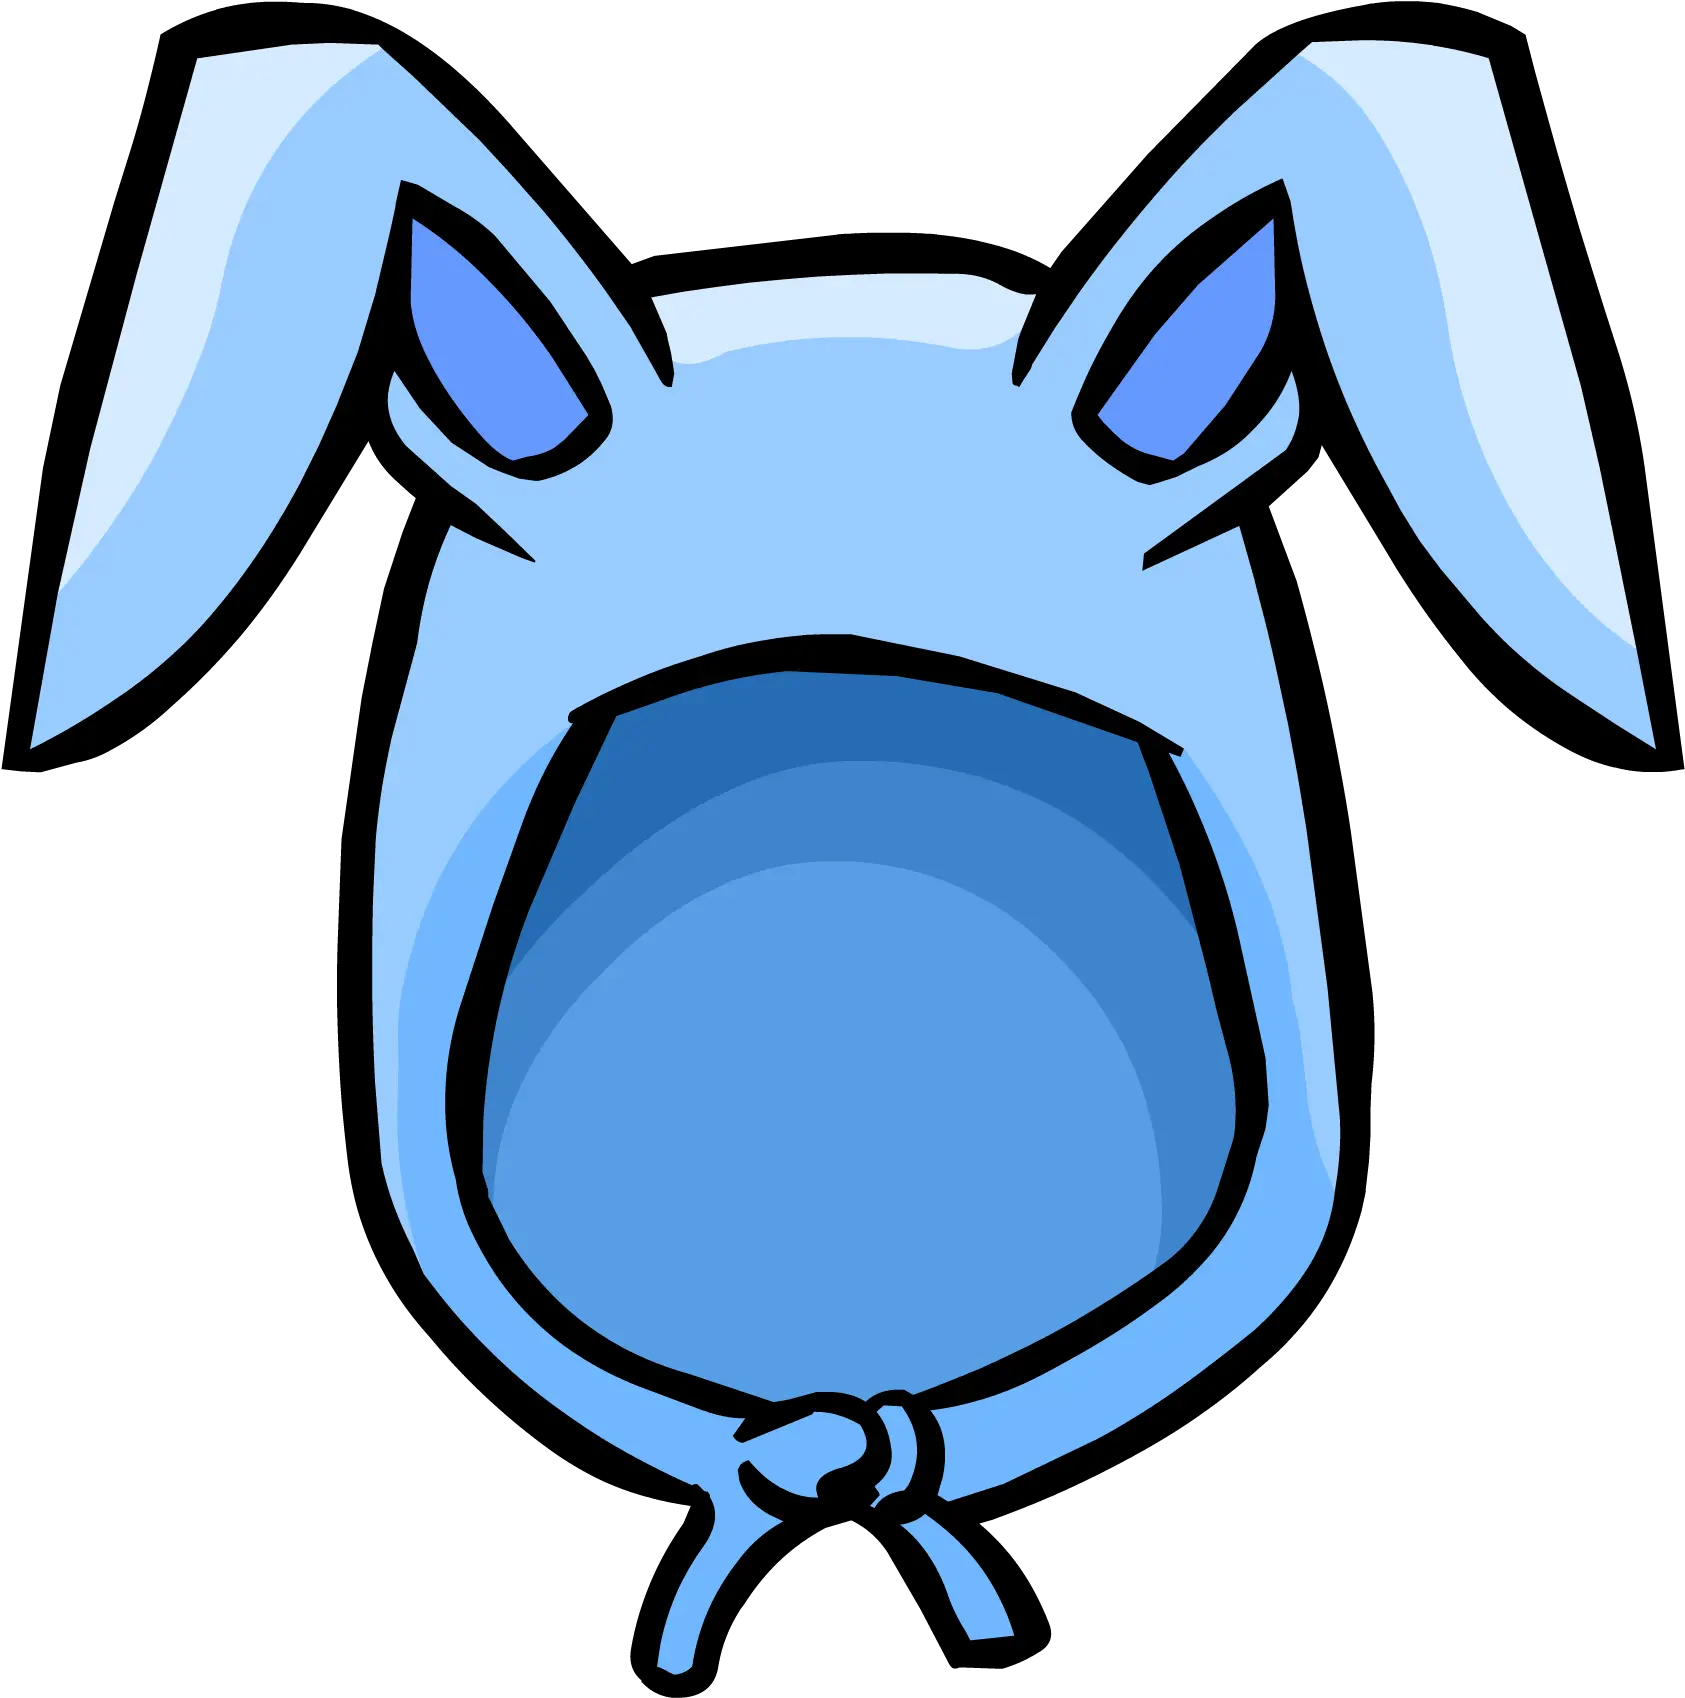 Download Image Ears Png Club Penguin Wiki Fandom Logotipo Club Penguin Bunny Ears Ears Png